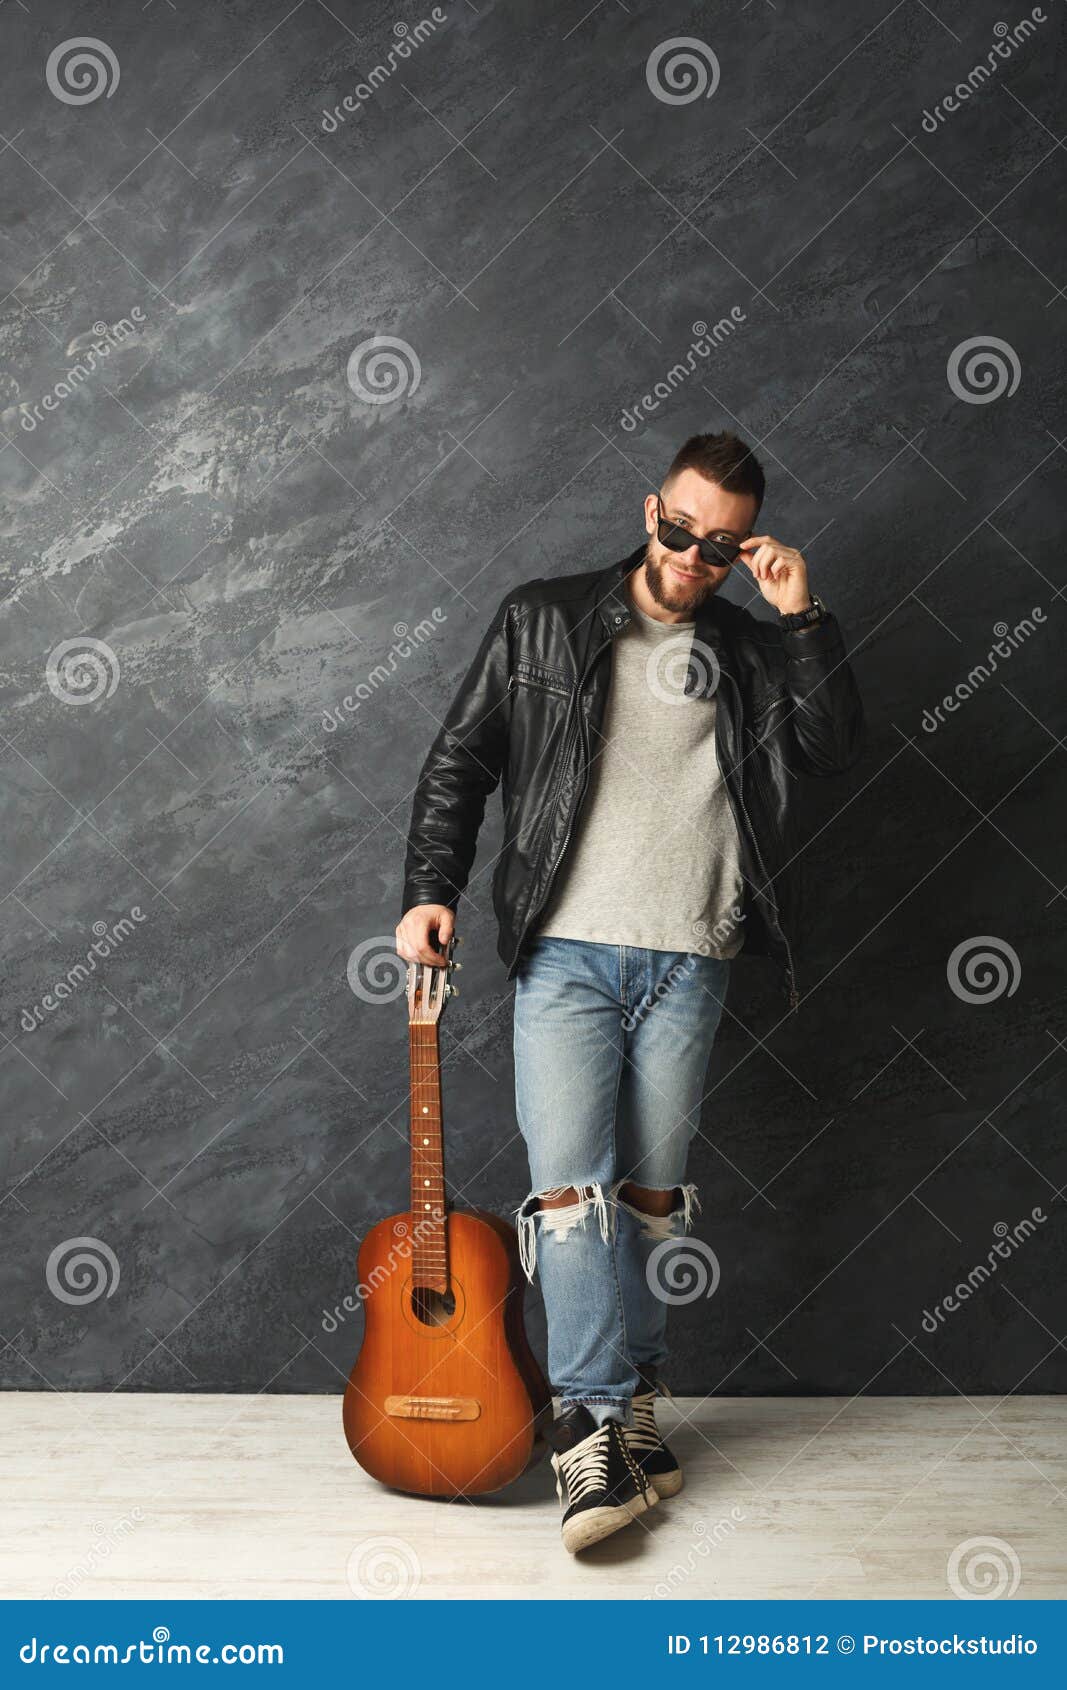 Studio Portrait From Below Upward Of Young Guitarist Pose With Leg Up,  Holding Guitar While Looking Away Stock Photo, Picture and Royalty Free  Image. Image 51844317.